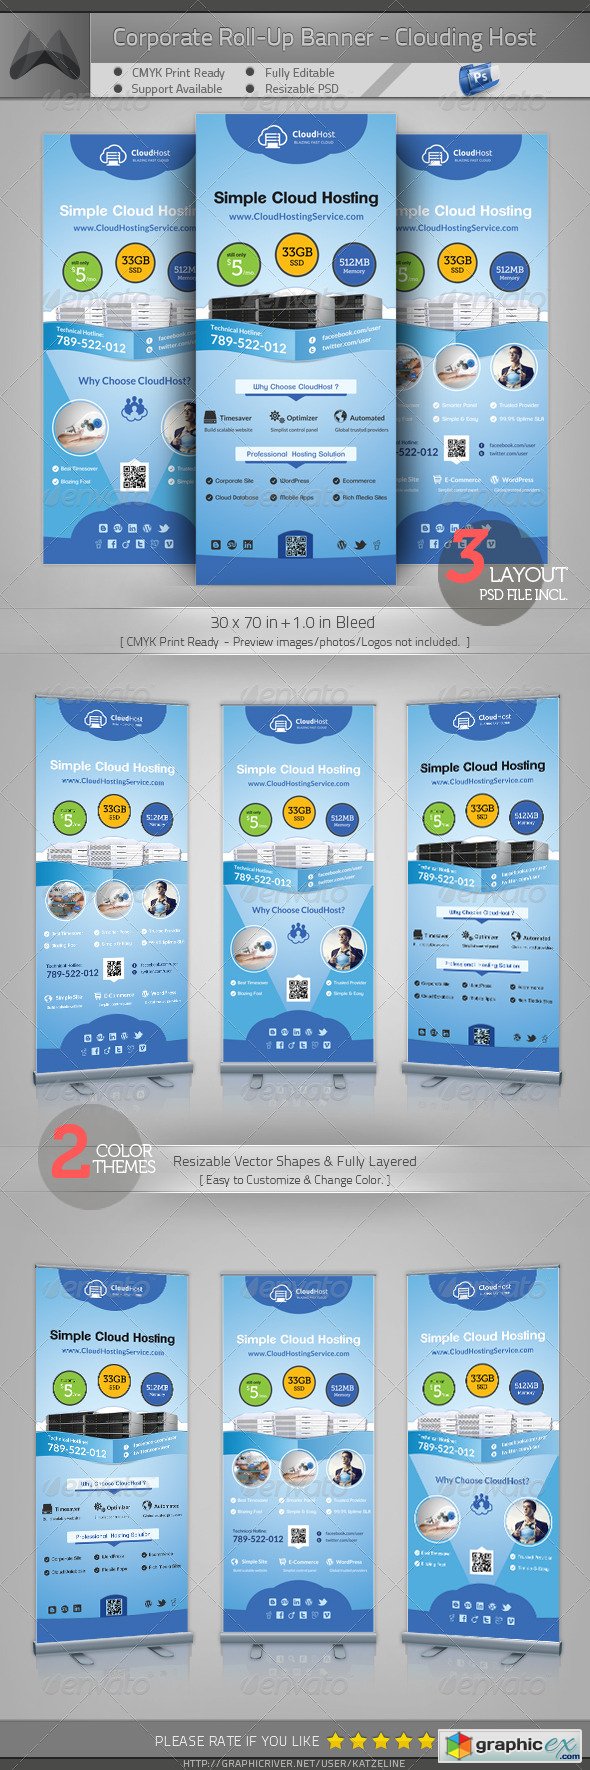 Graphicriver Cloud Hosting Service - Roll-up Banner Template